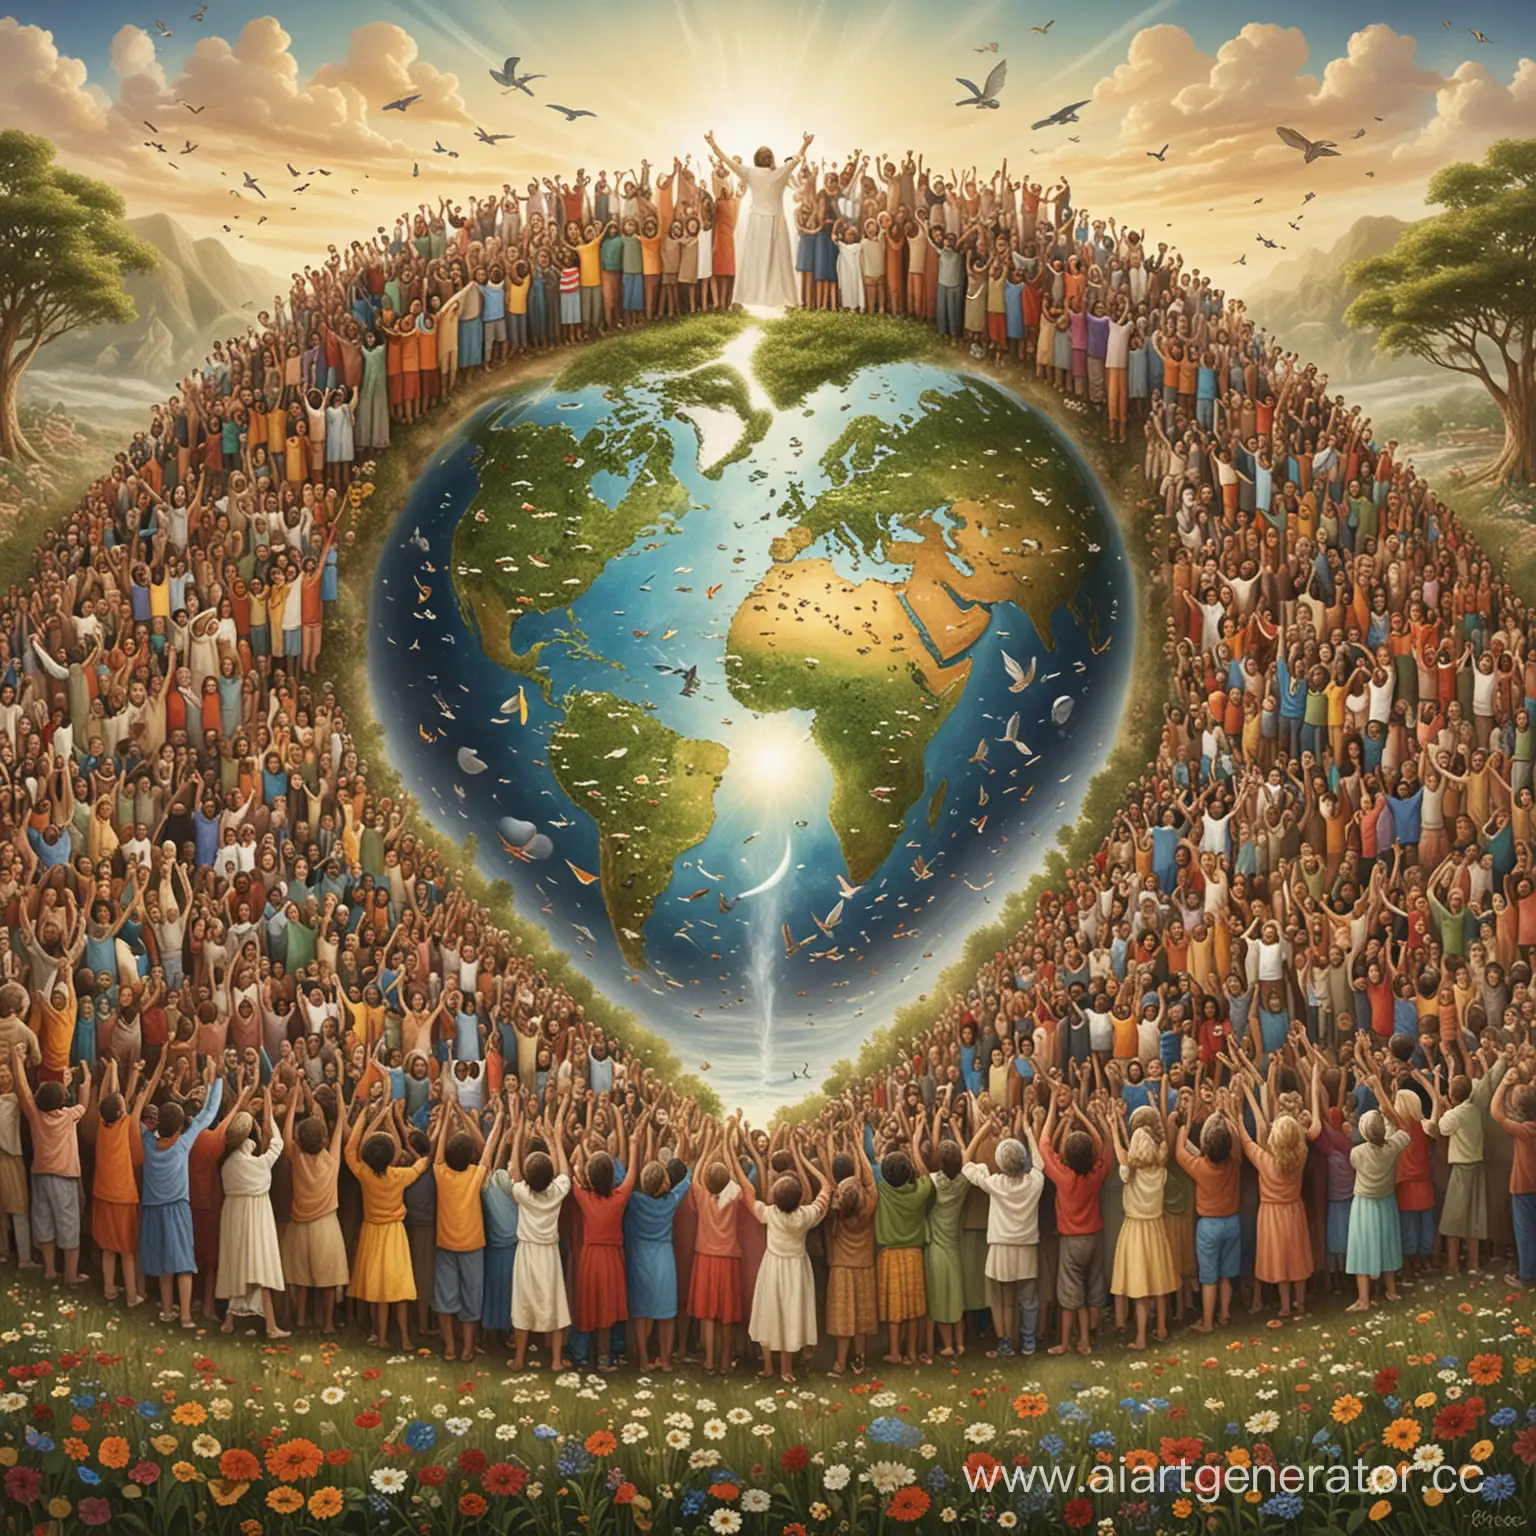 Global-Community-United-in-Compassion-and-Progress